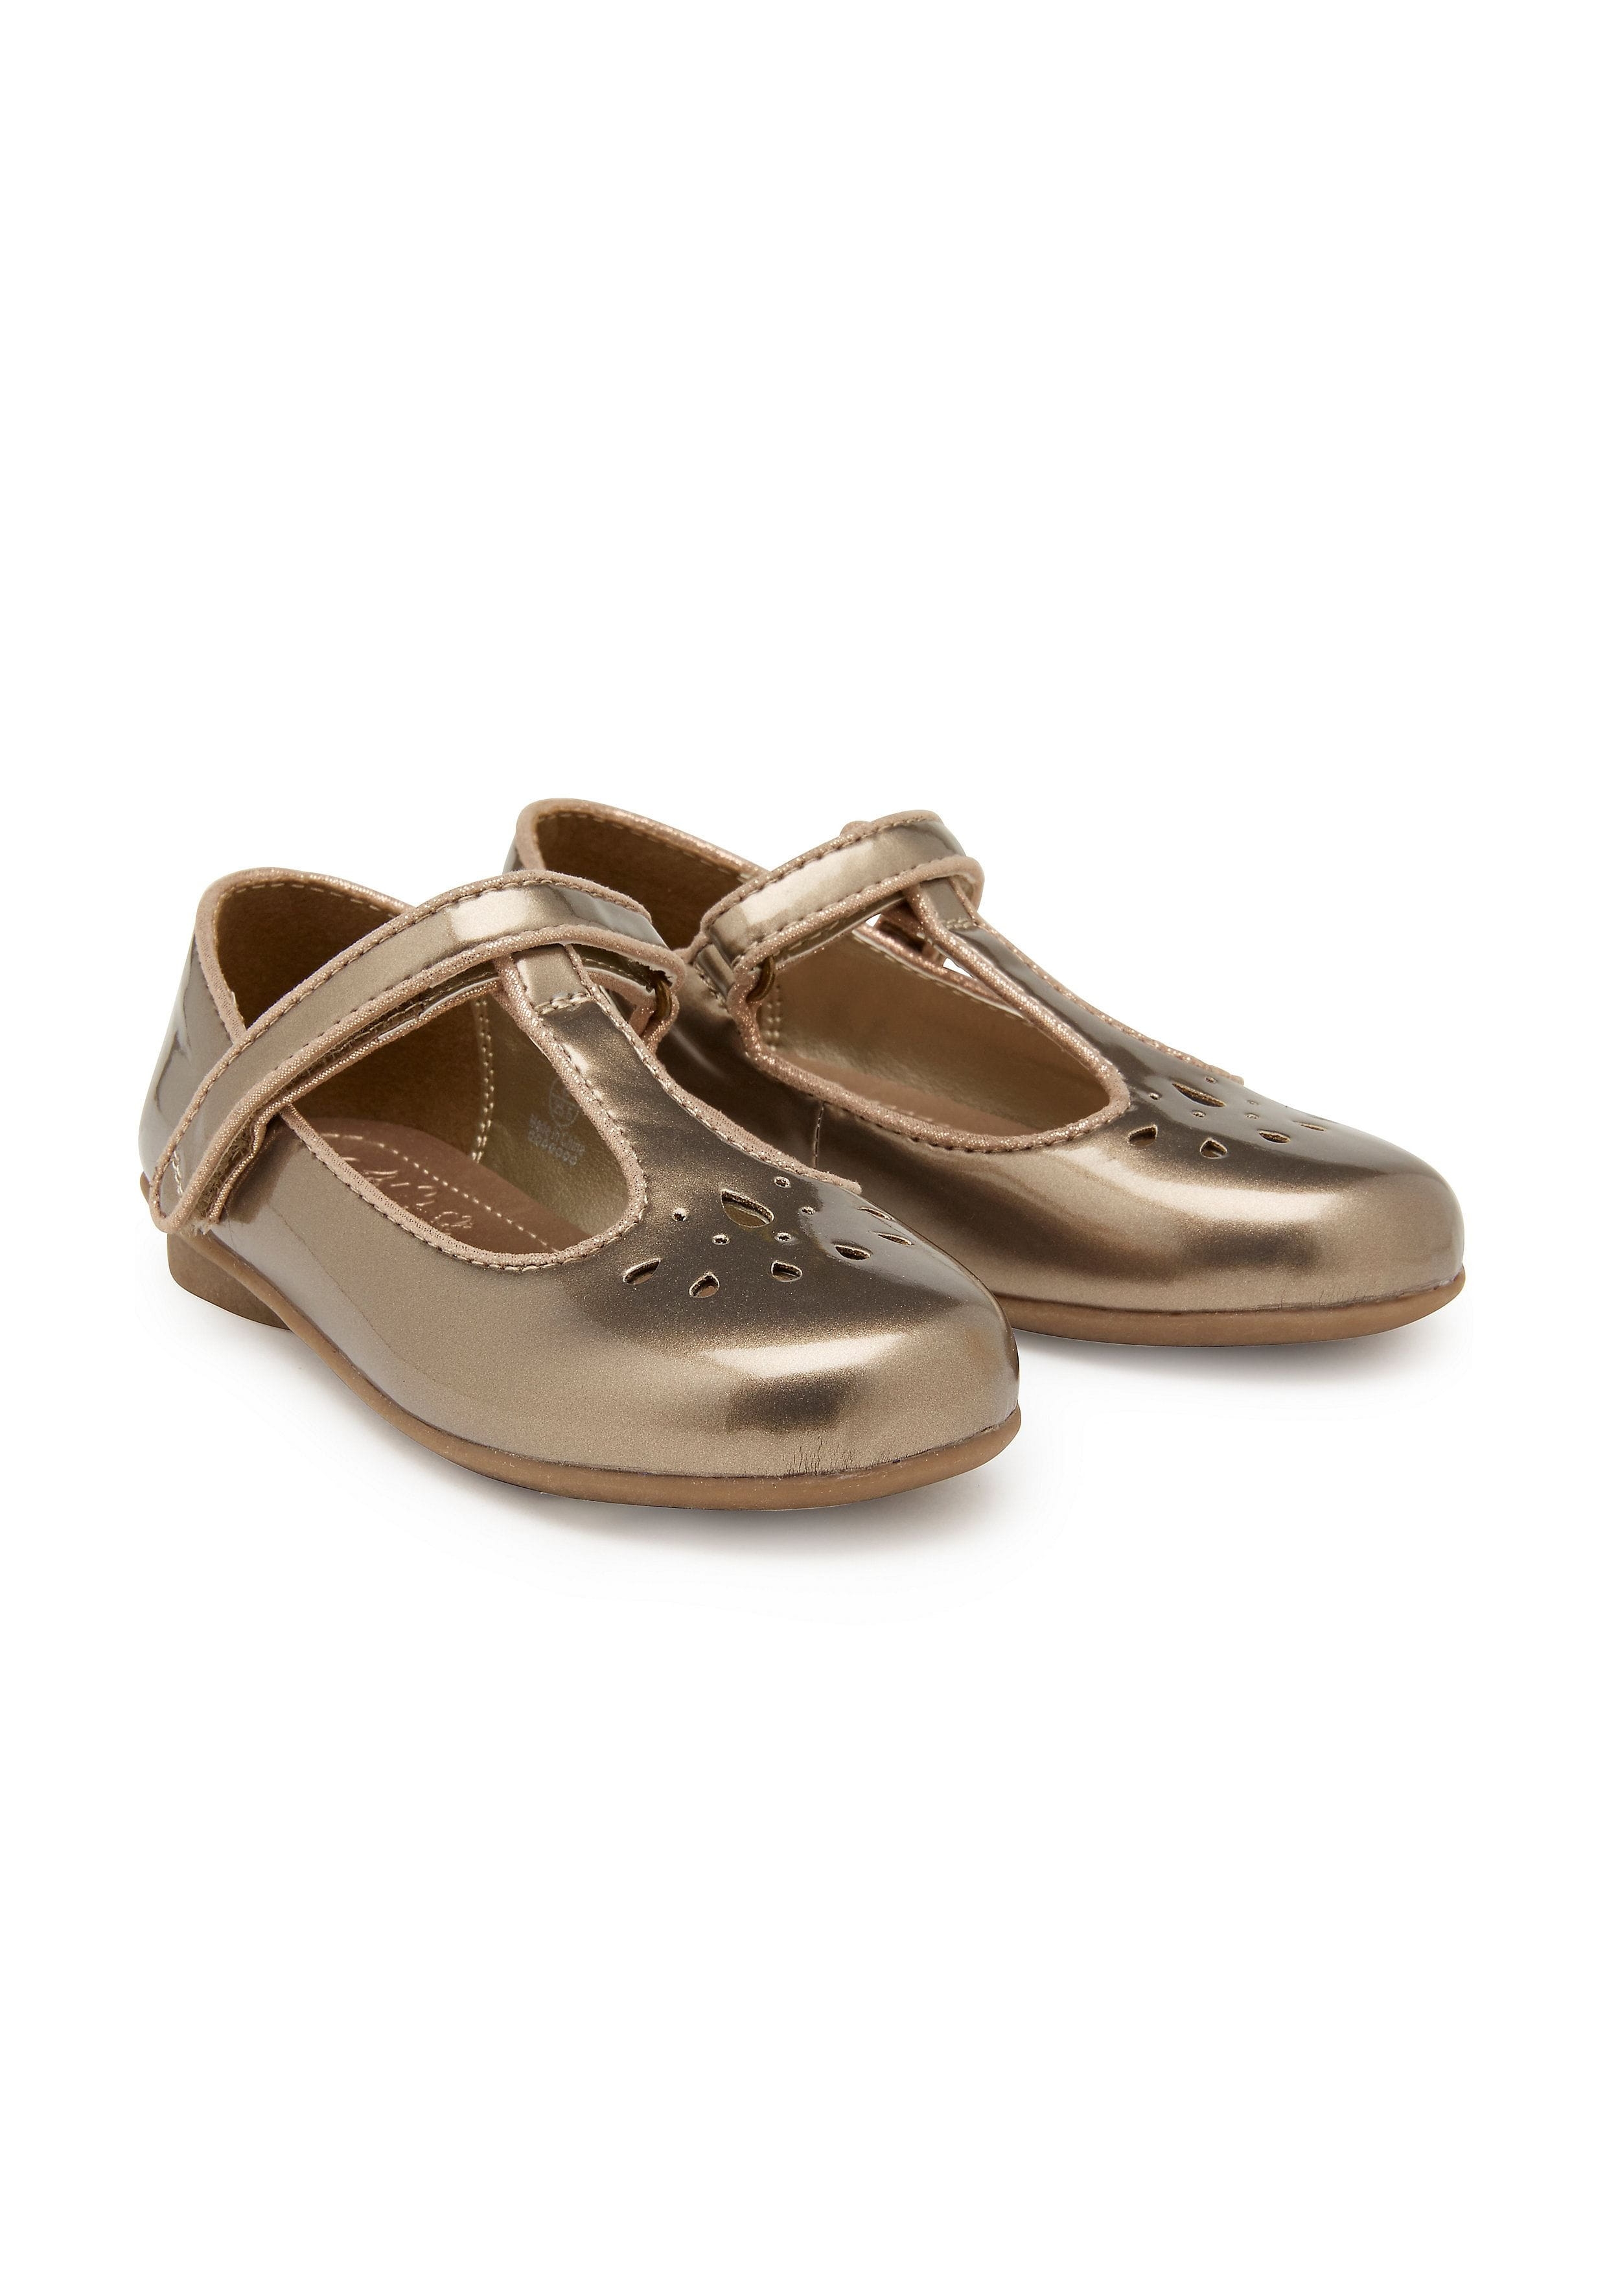 Mothercare | Girls T-Bar Shoes Cut Out Design - Gold 0